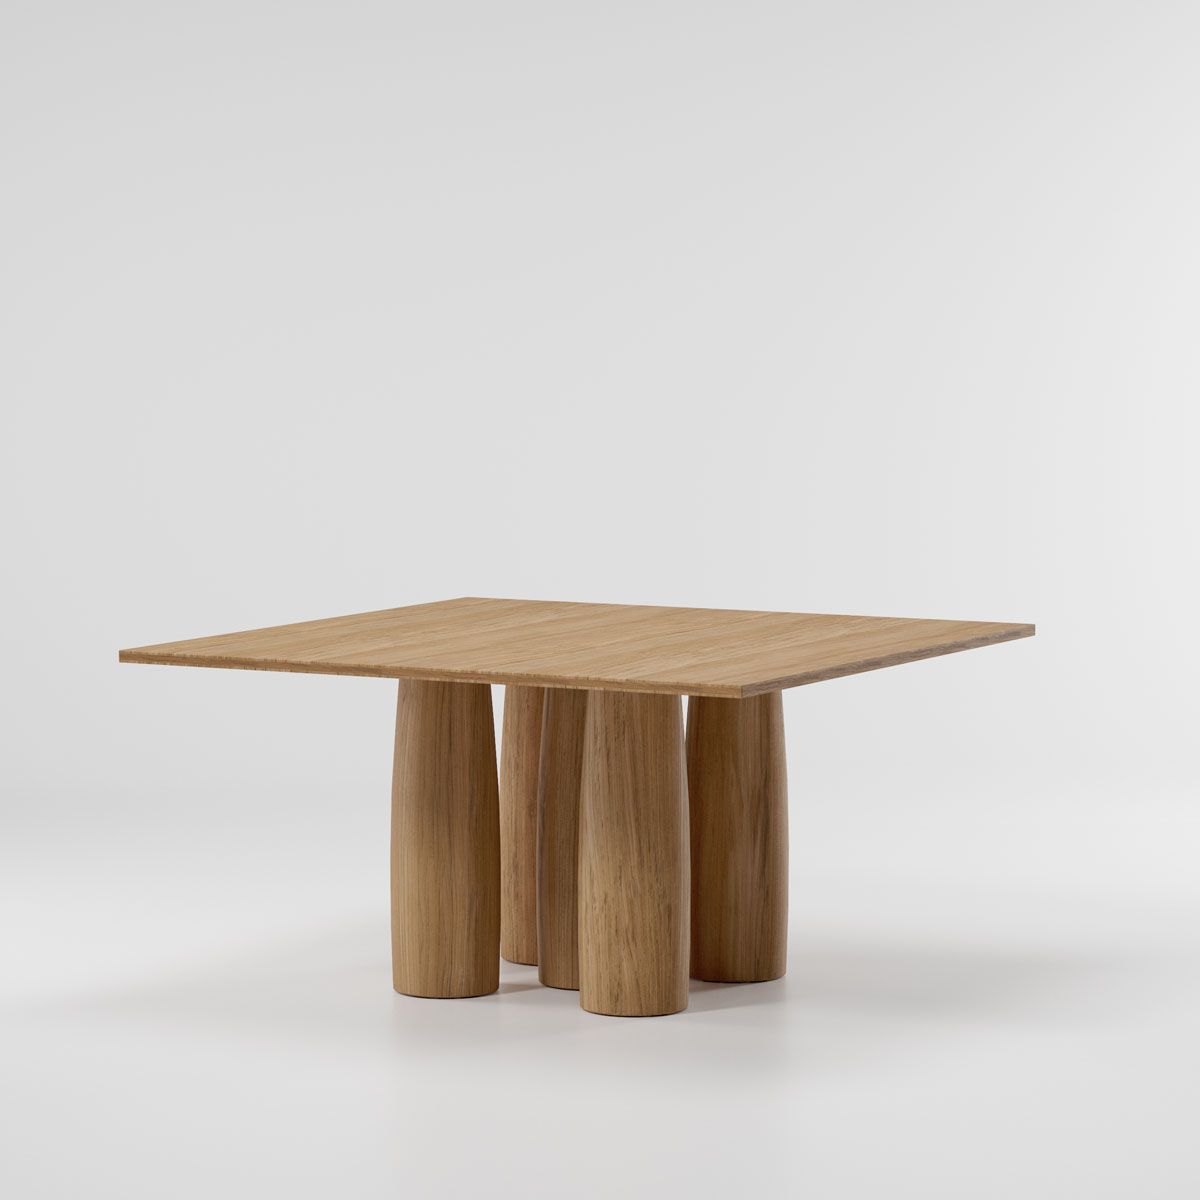 Teak dining table 140x140 / 8 Guest